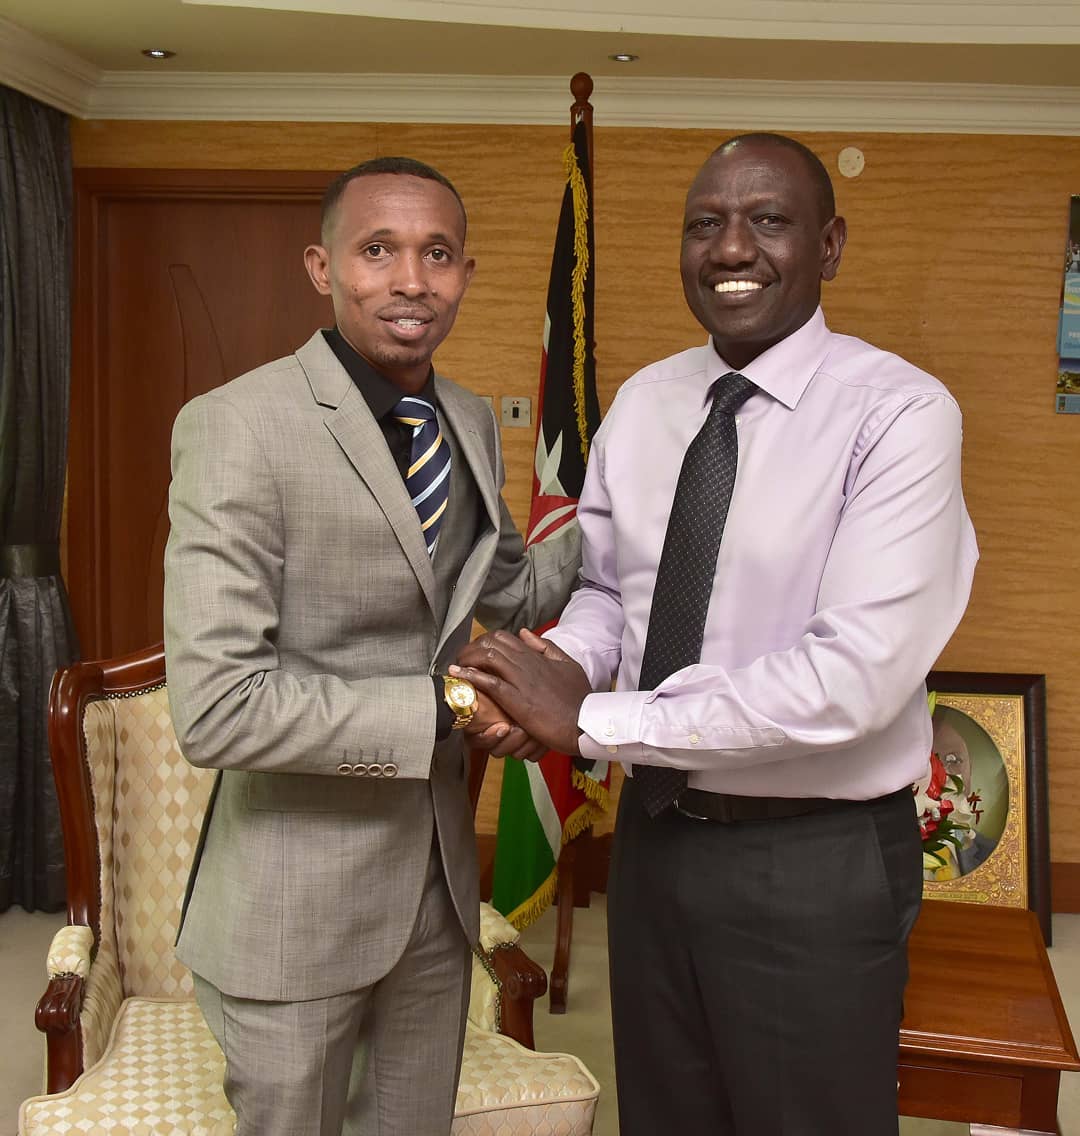 Mohammed Ali and William Ruto